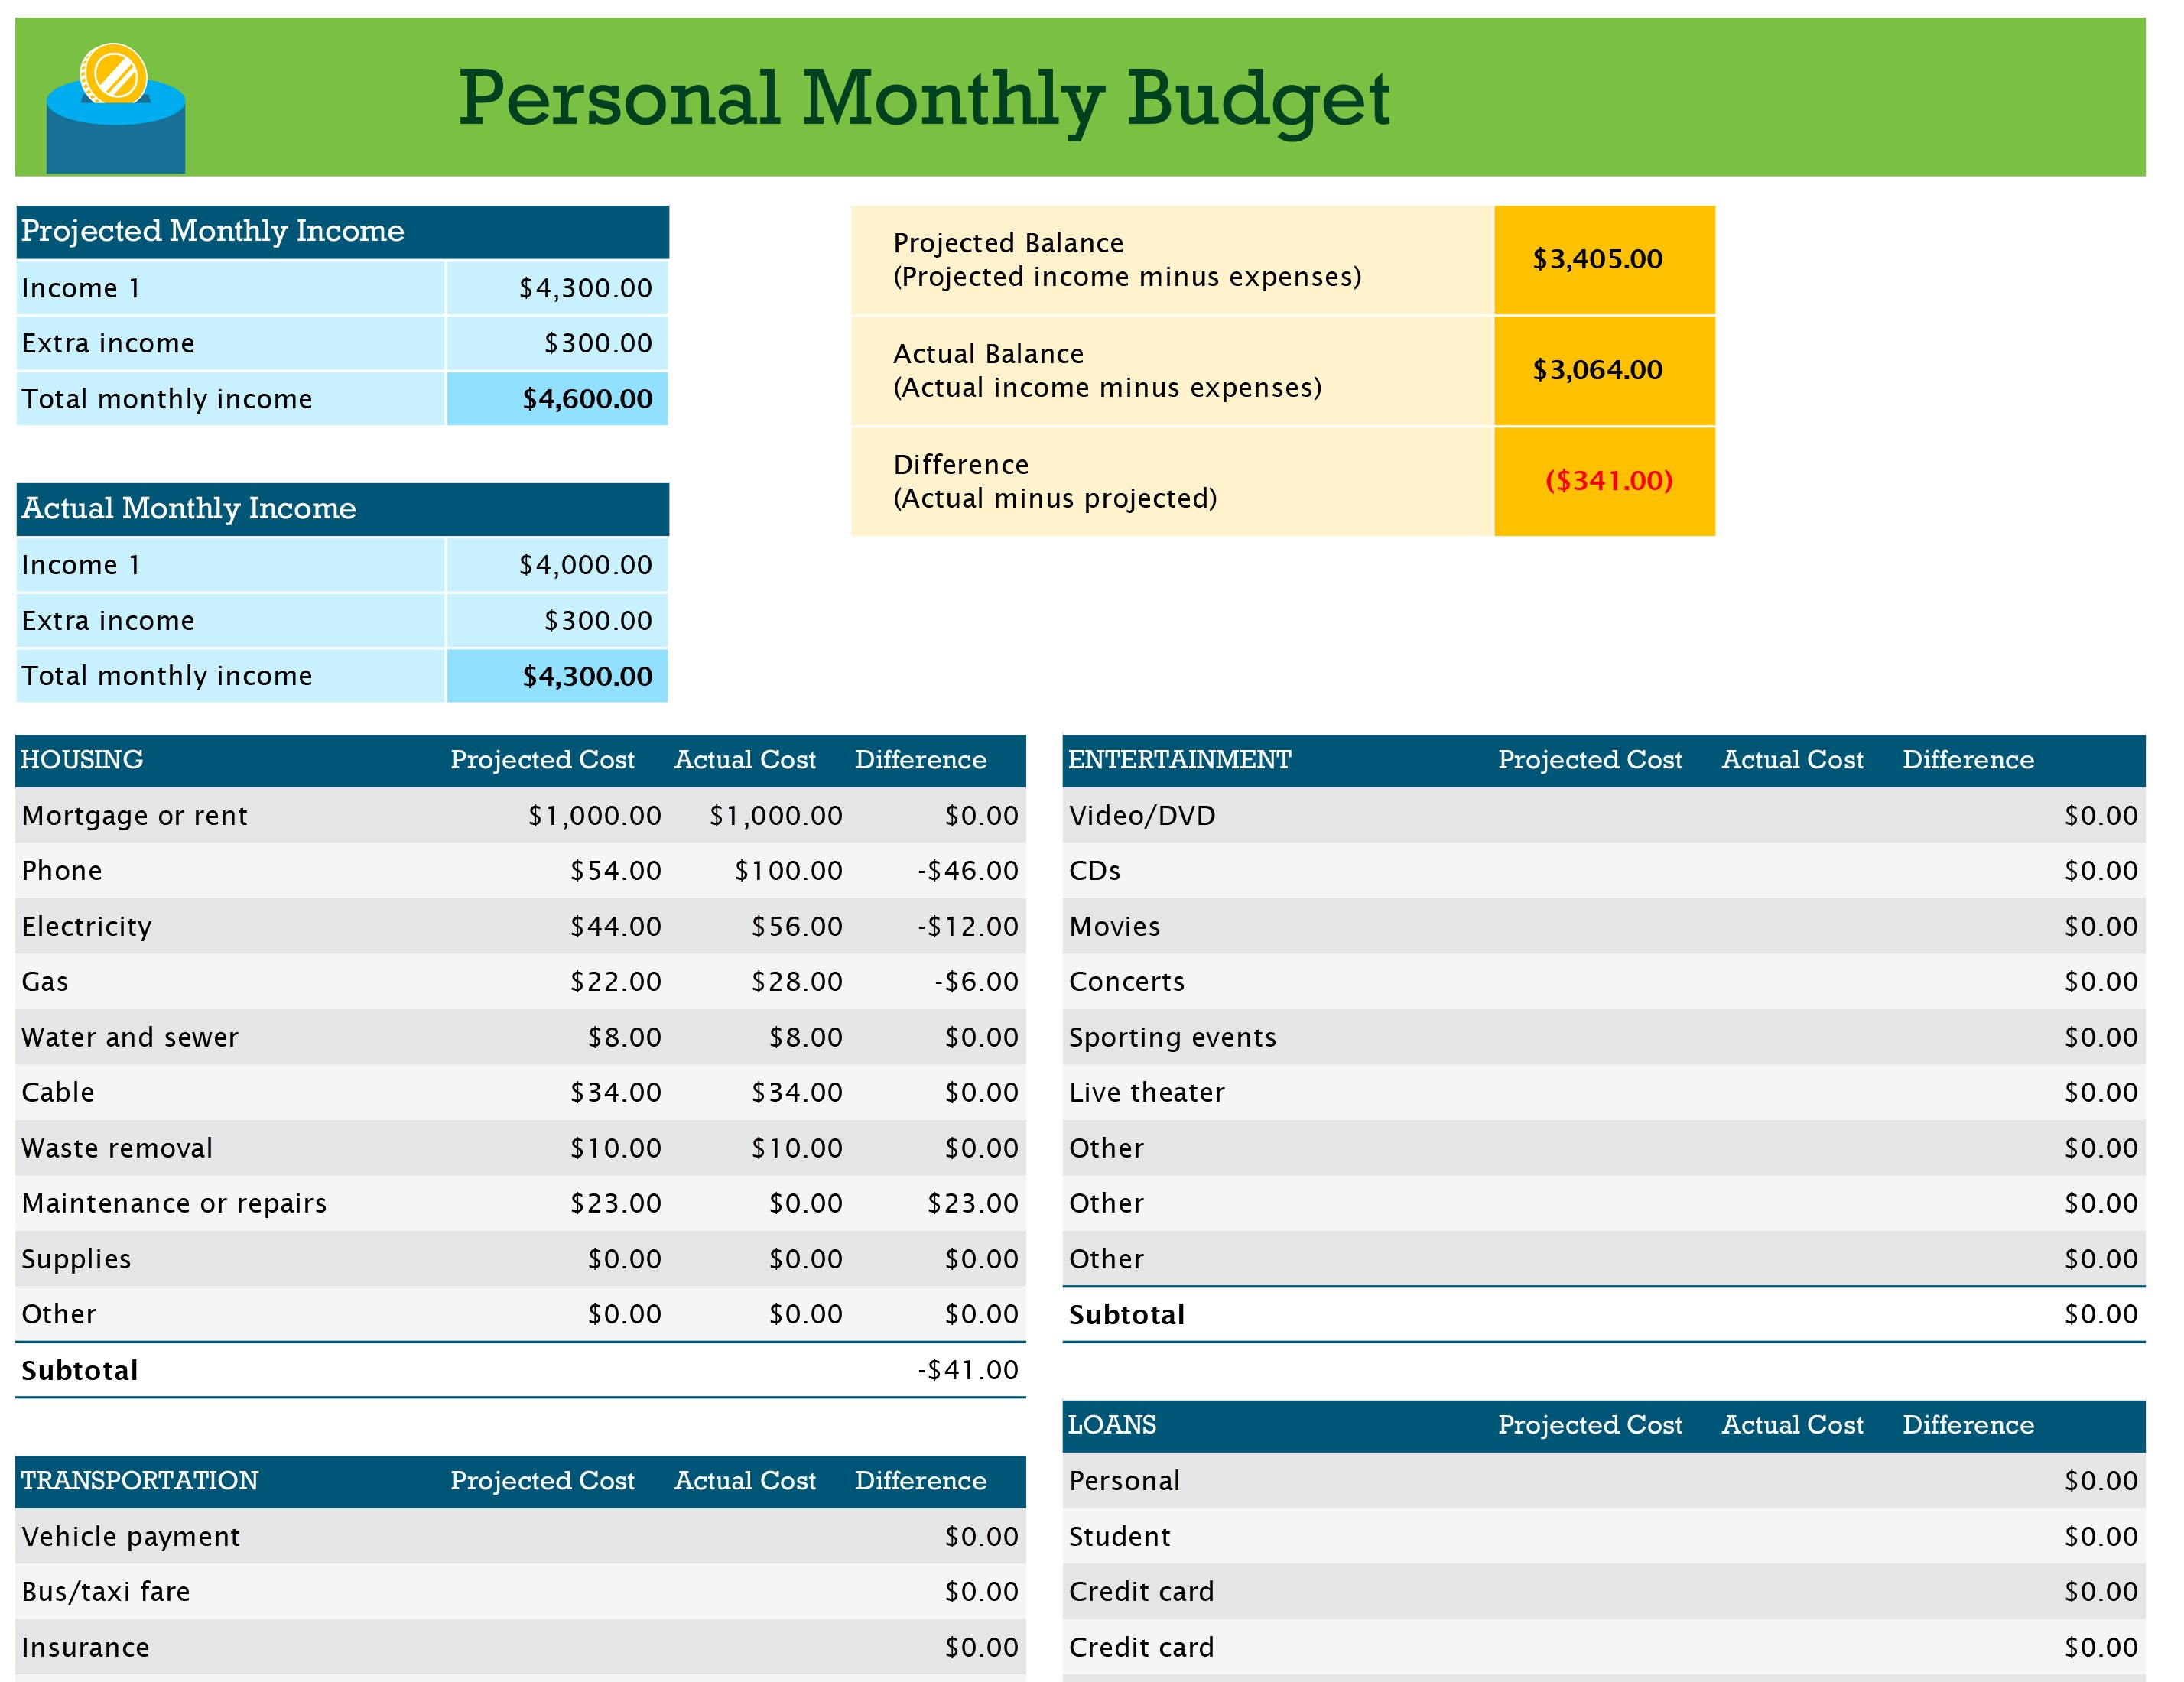 Personal Monthly Budget Excel Spreadsheet With Budgets  Office